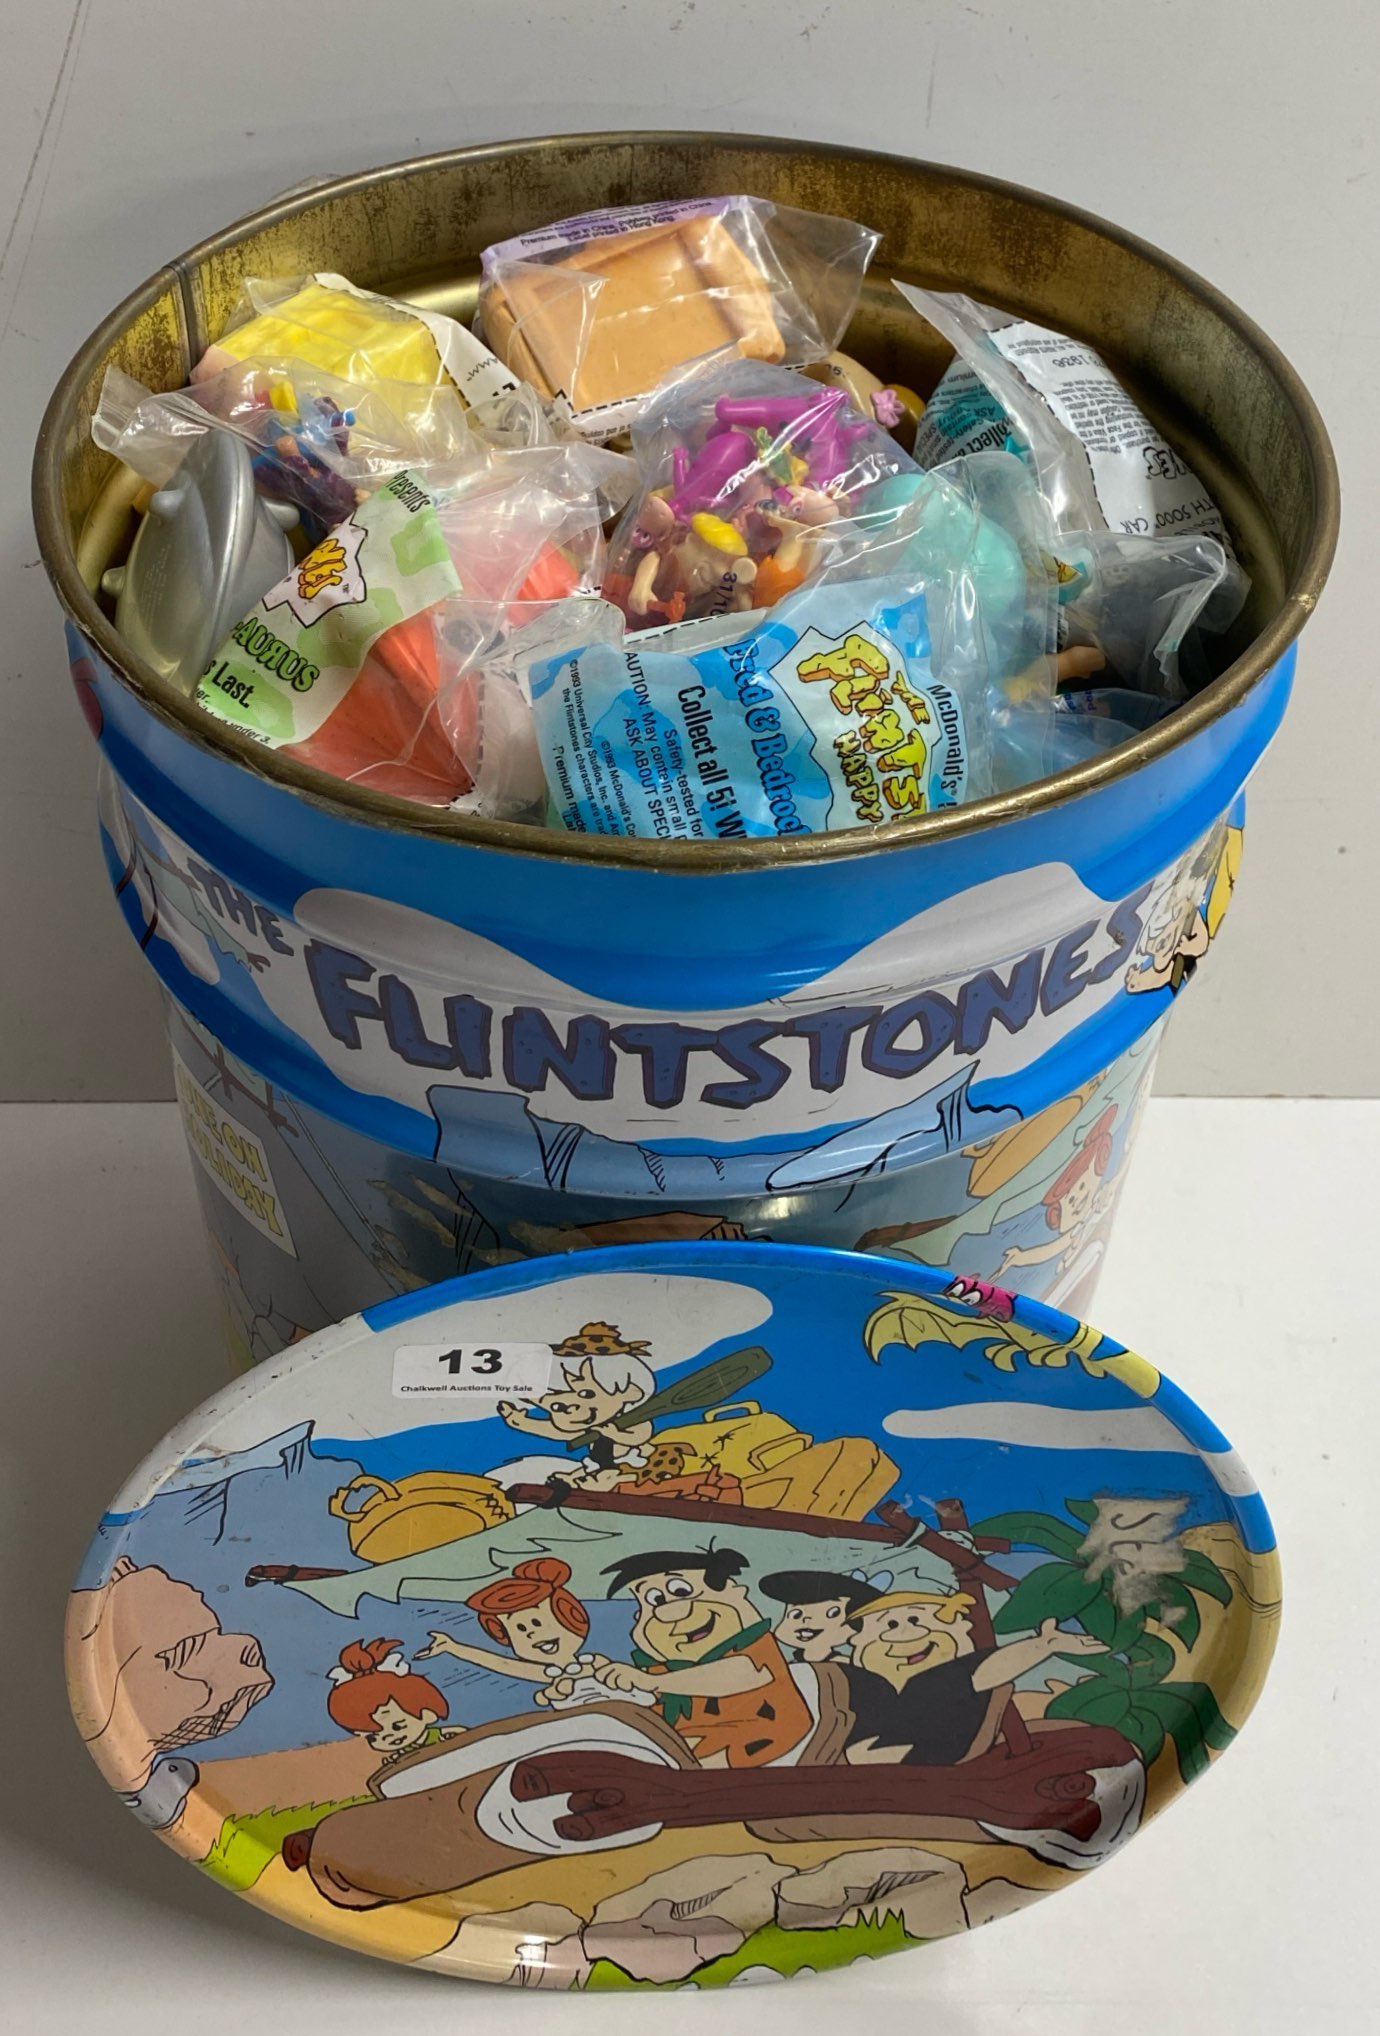 A very large quantity of The Flintstones including McDonalds happy meal toys.